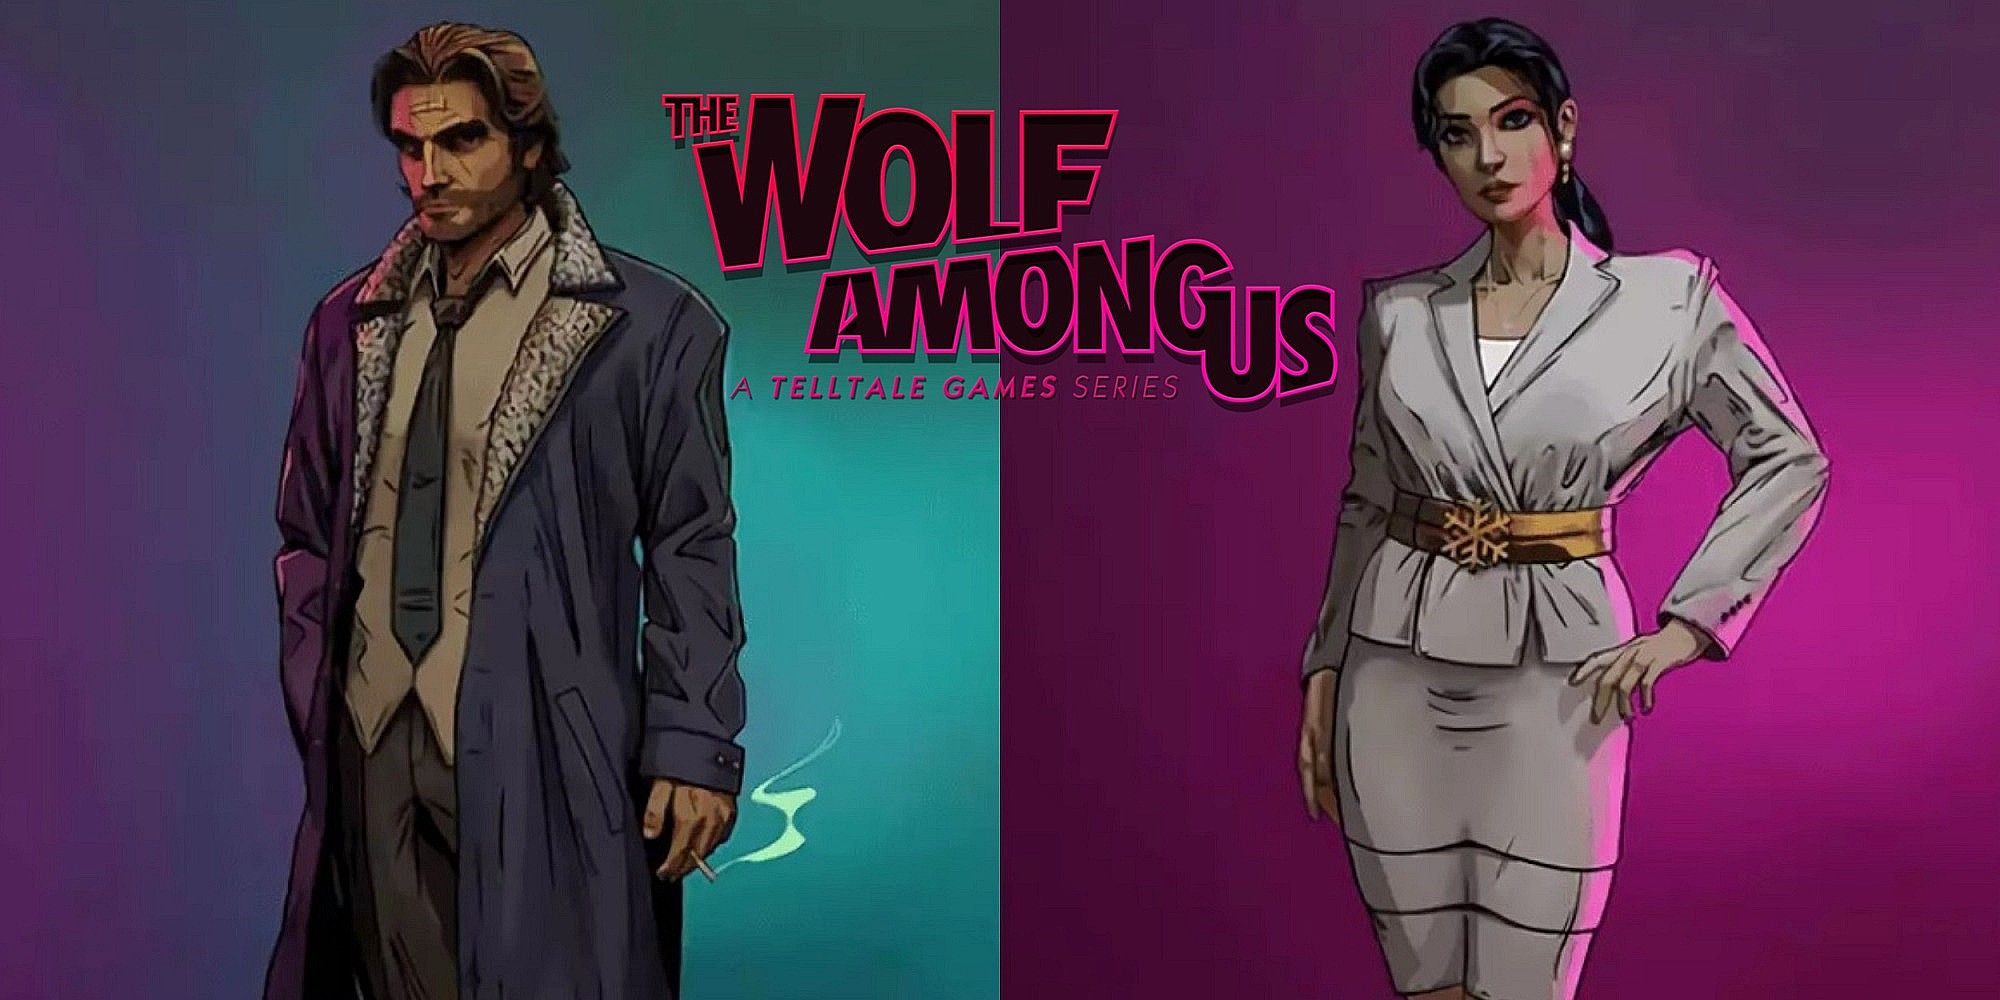 when will the wolf among us season 2 be released